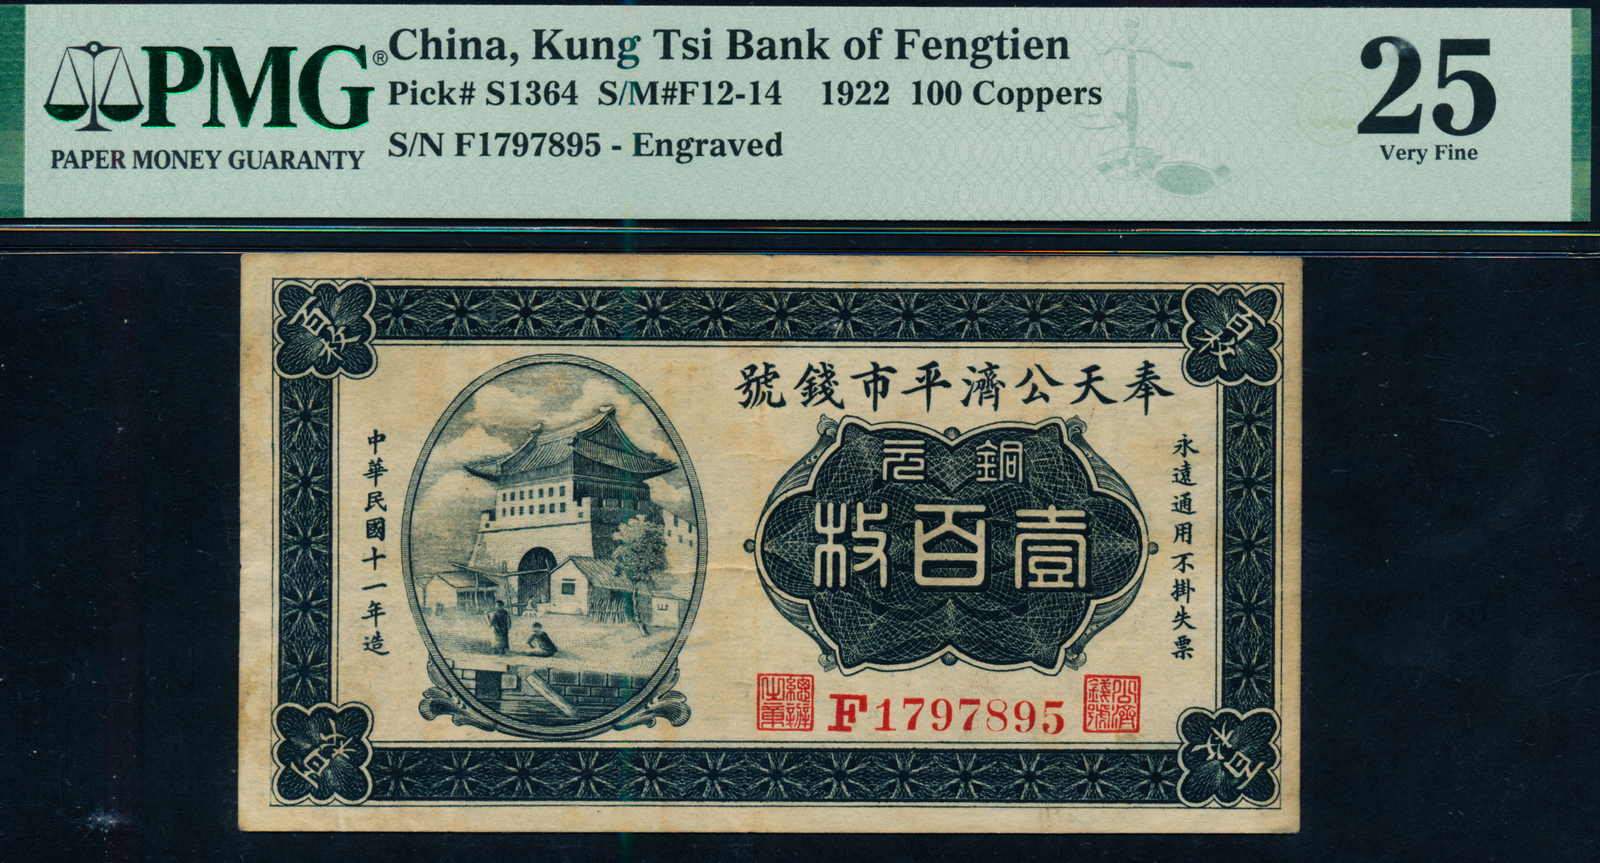 China Kung Tsi Bank of Fengtien 1922 100 Coppers F 1797895 PMG 25 